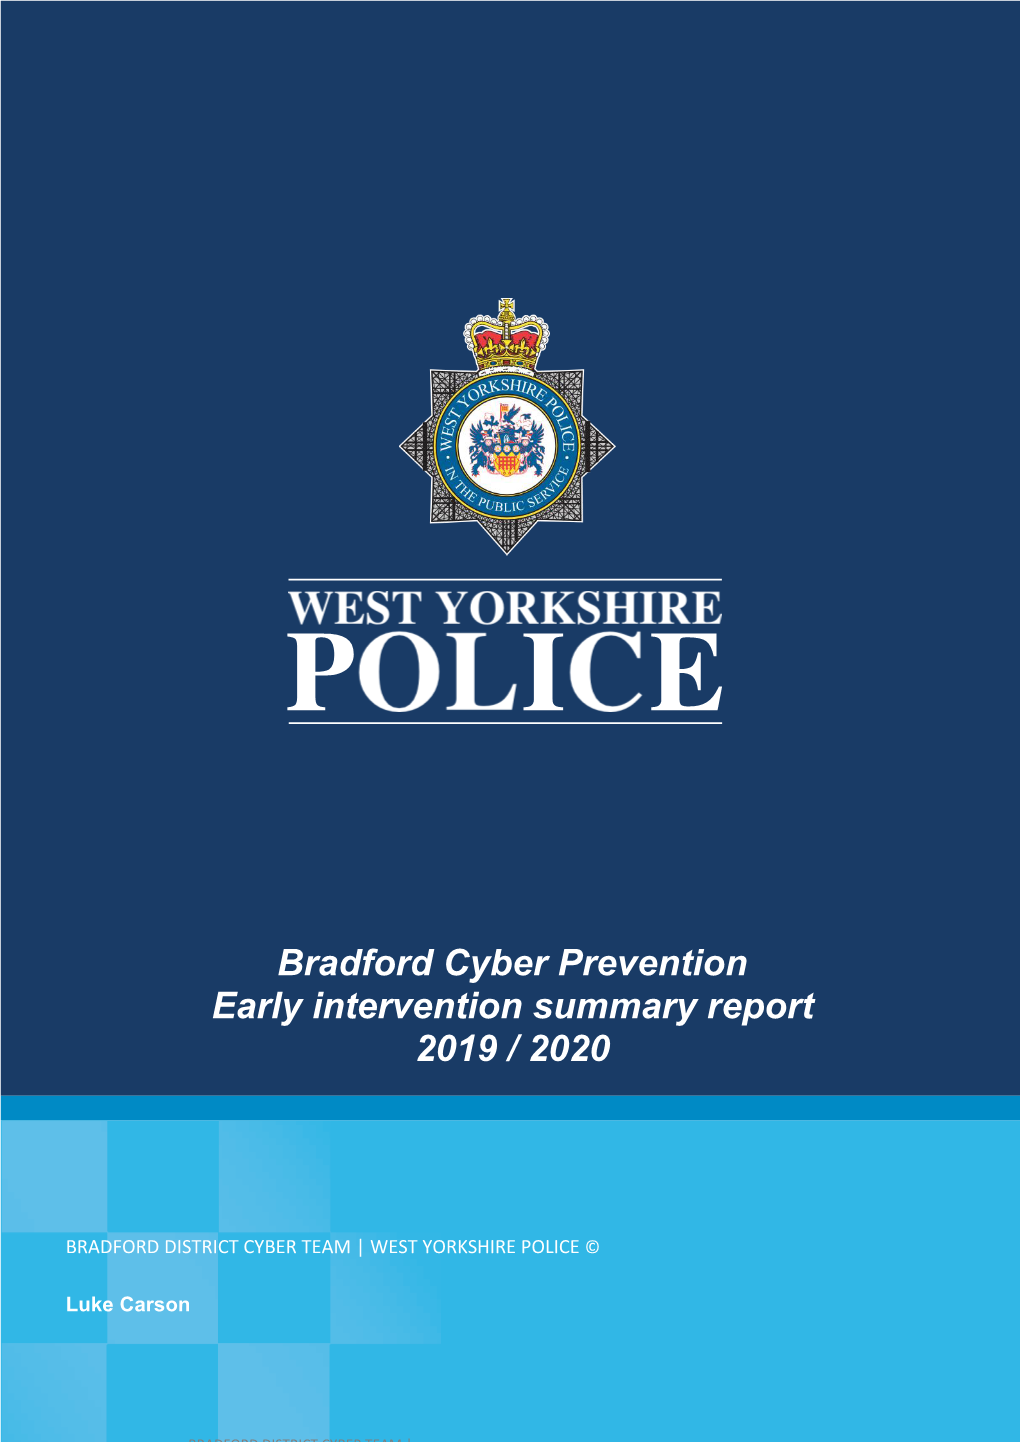 Bradford Cyber Prevention Early Intervention Summary Report 2019 / 2020